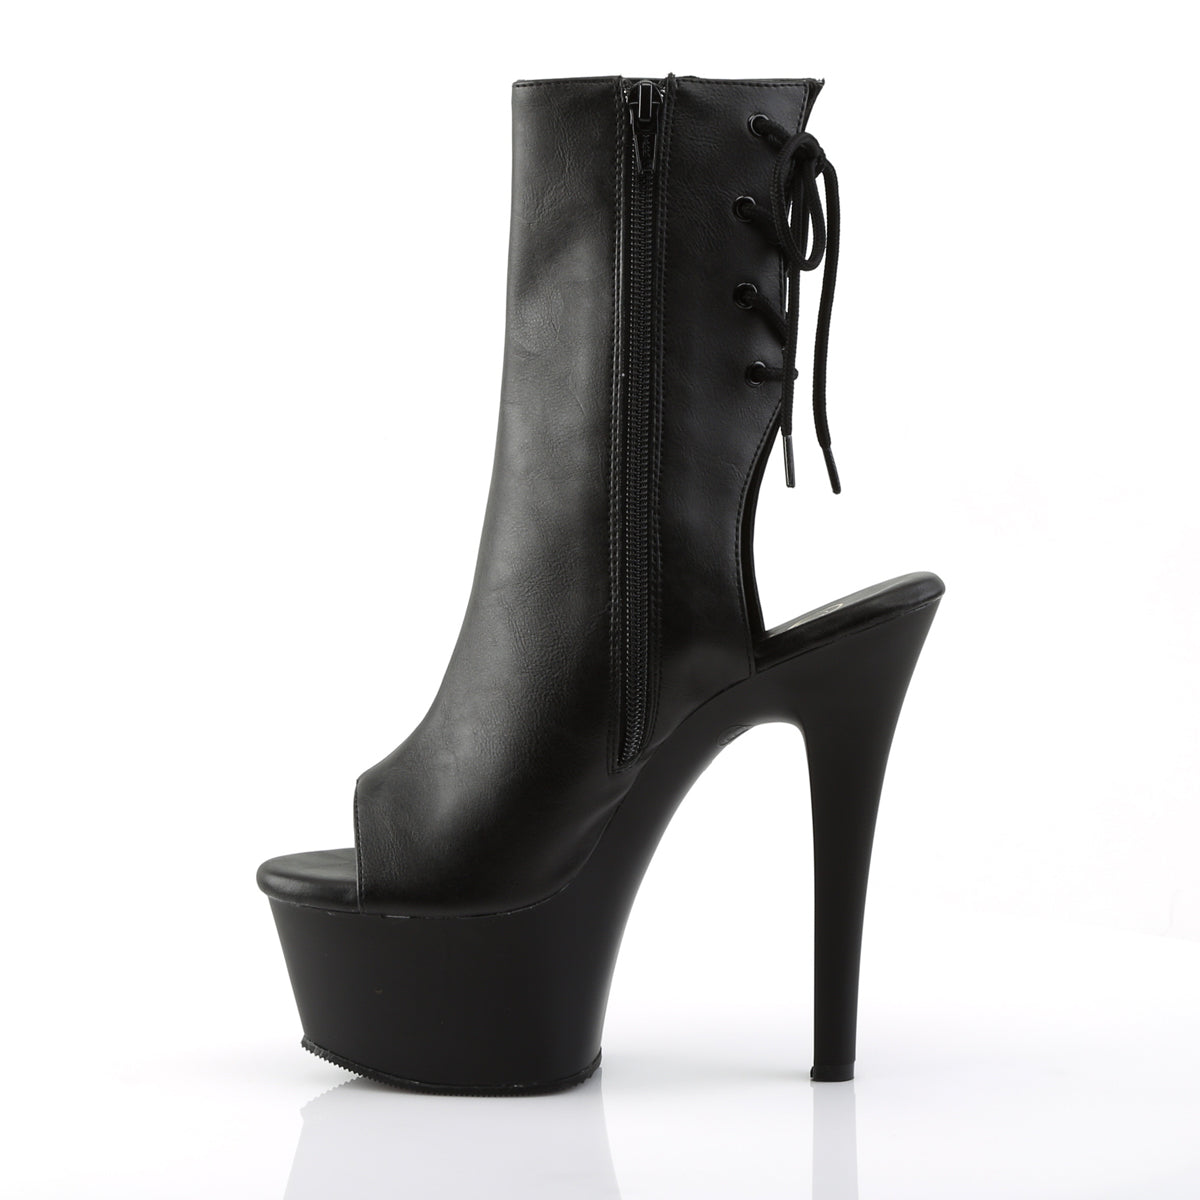 ASPIRE-1018 Pleasers 6 Inch Heel Black Fetish Ankle Boots-Pleaser- Sexy Shoes Pole Dance Heels